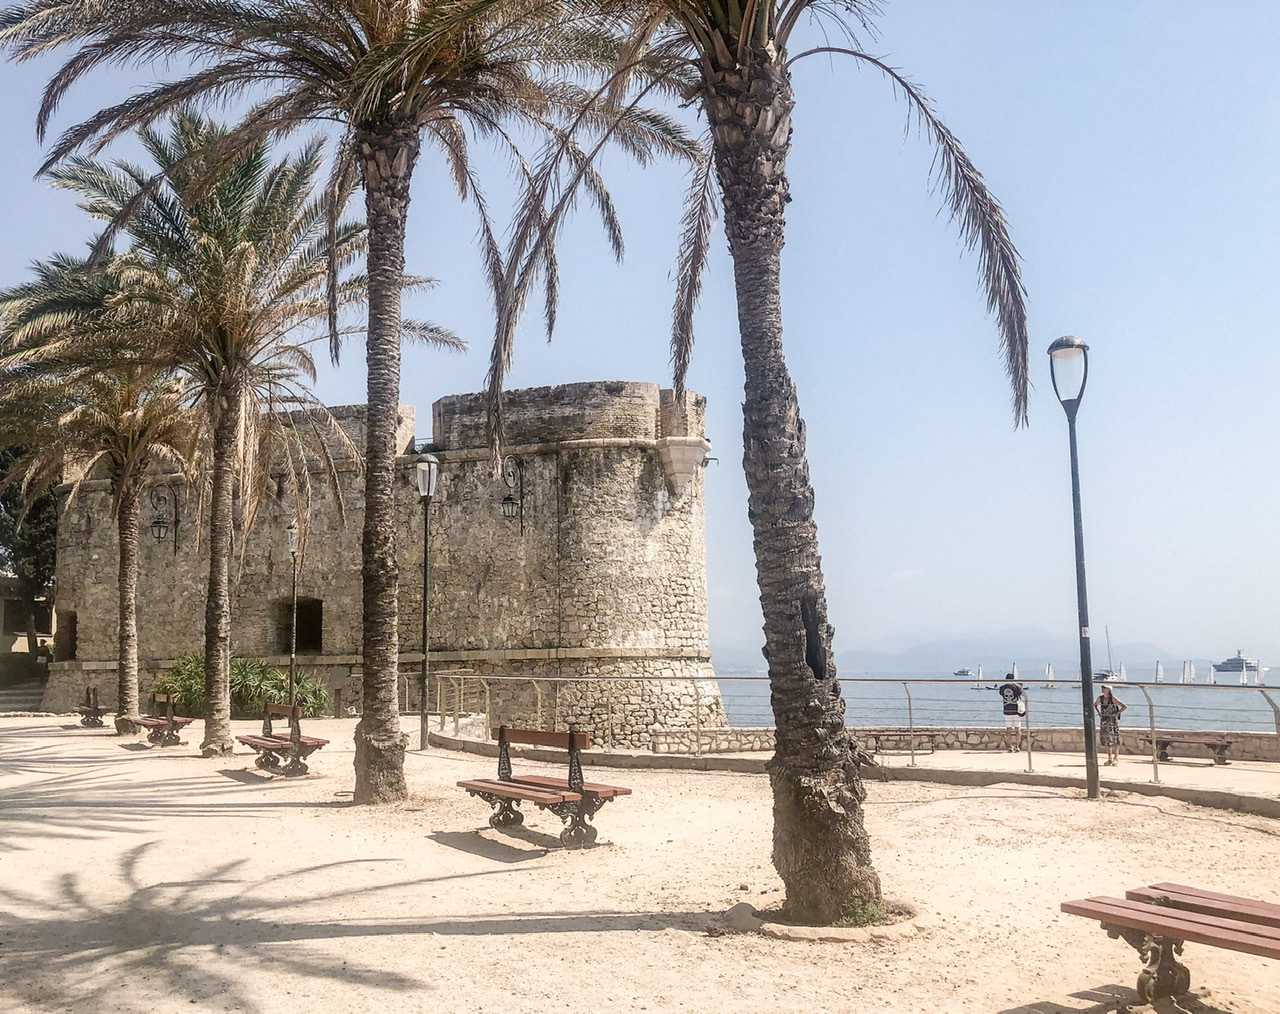 Castle shaped building in background on coast with four cabbage trees with park benches between